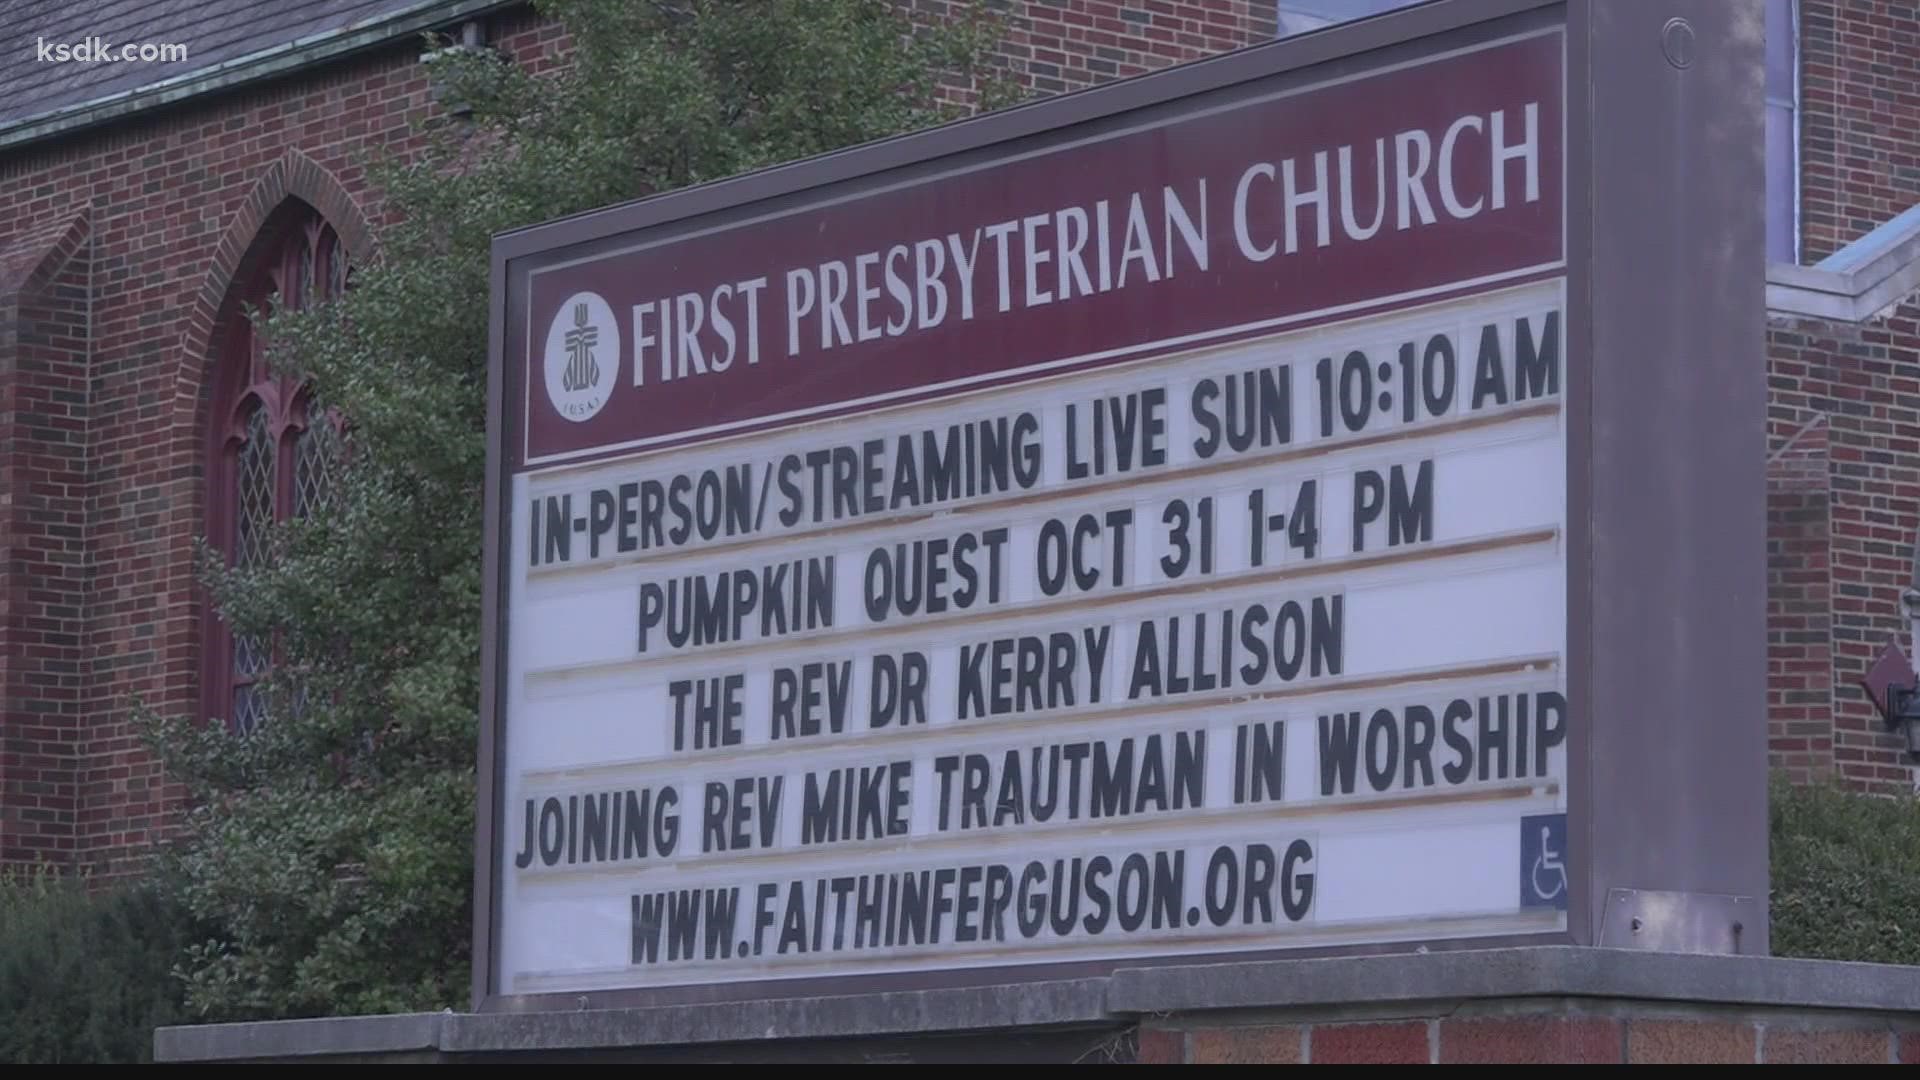 Pastor Kerry Allison hopes to increase congregation numbers with more diverse members.